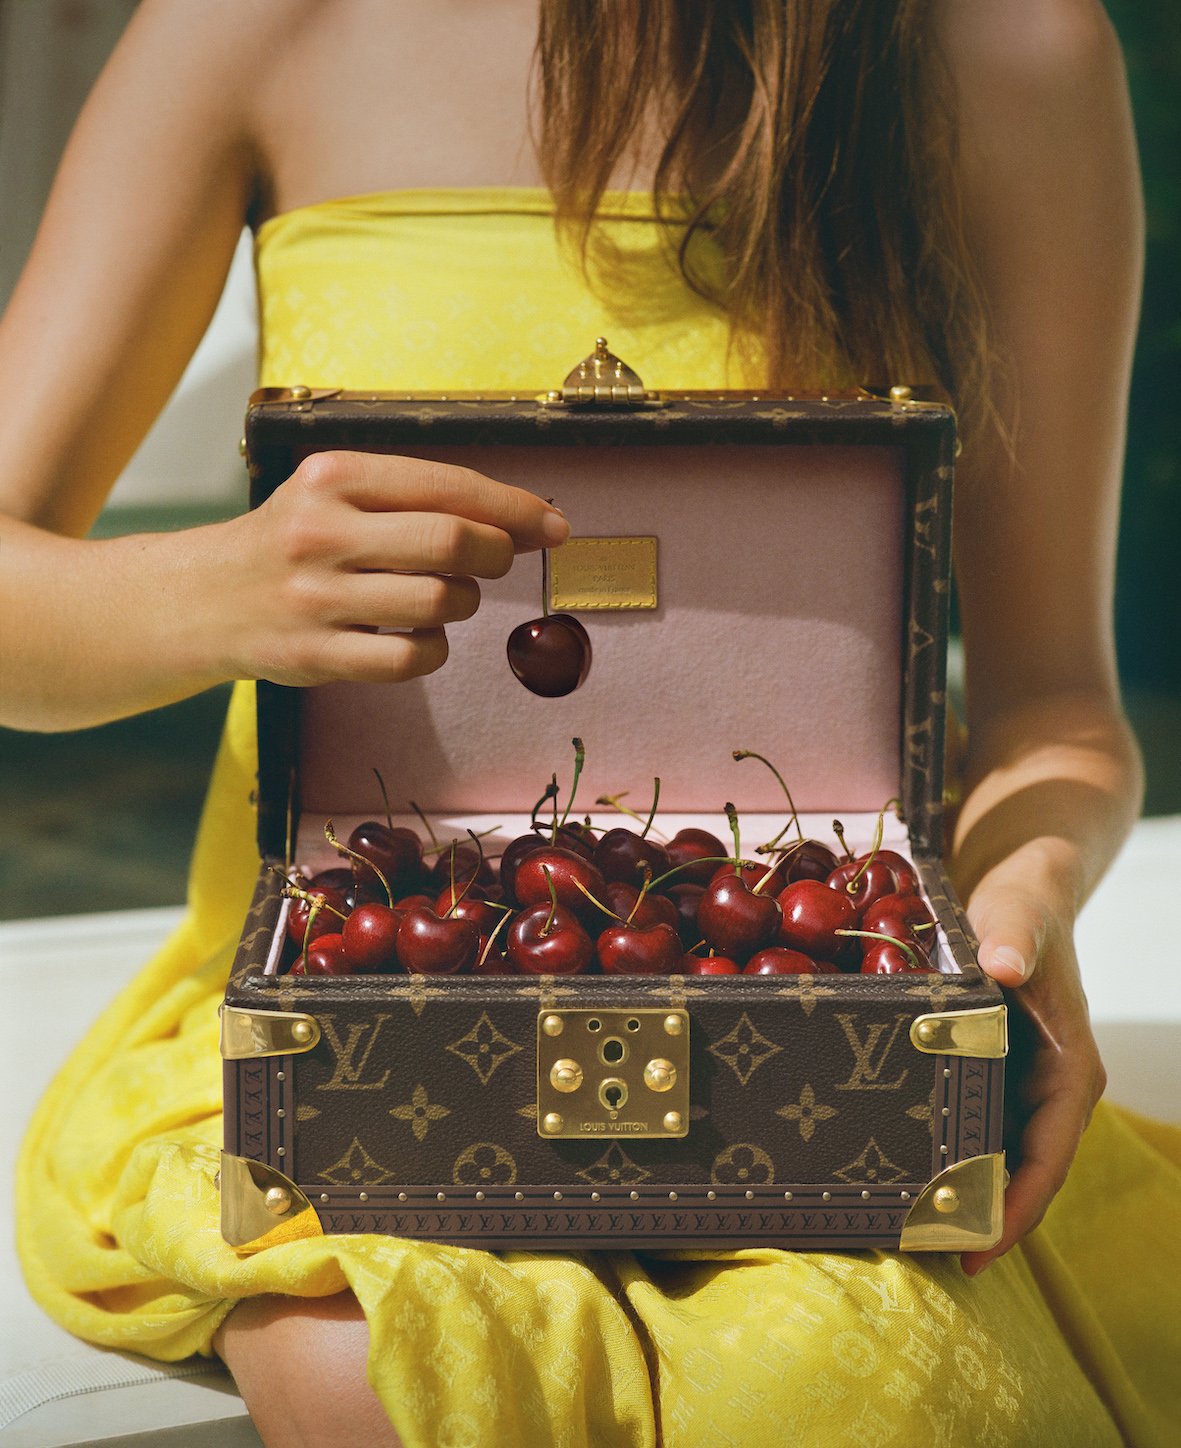 Louis Vuitton Services - Art of Gifting